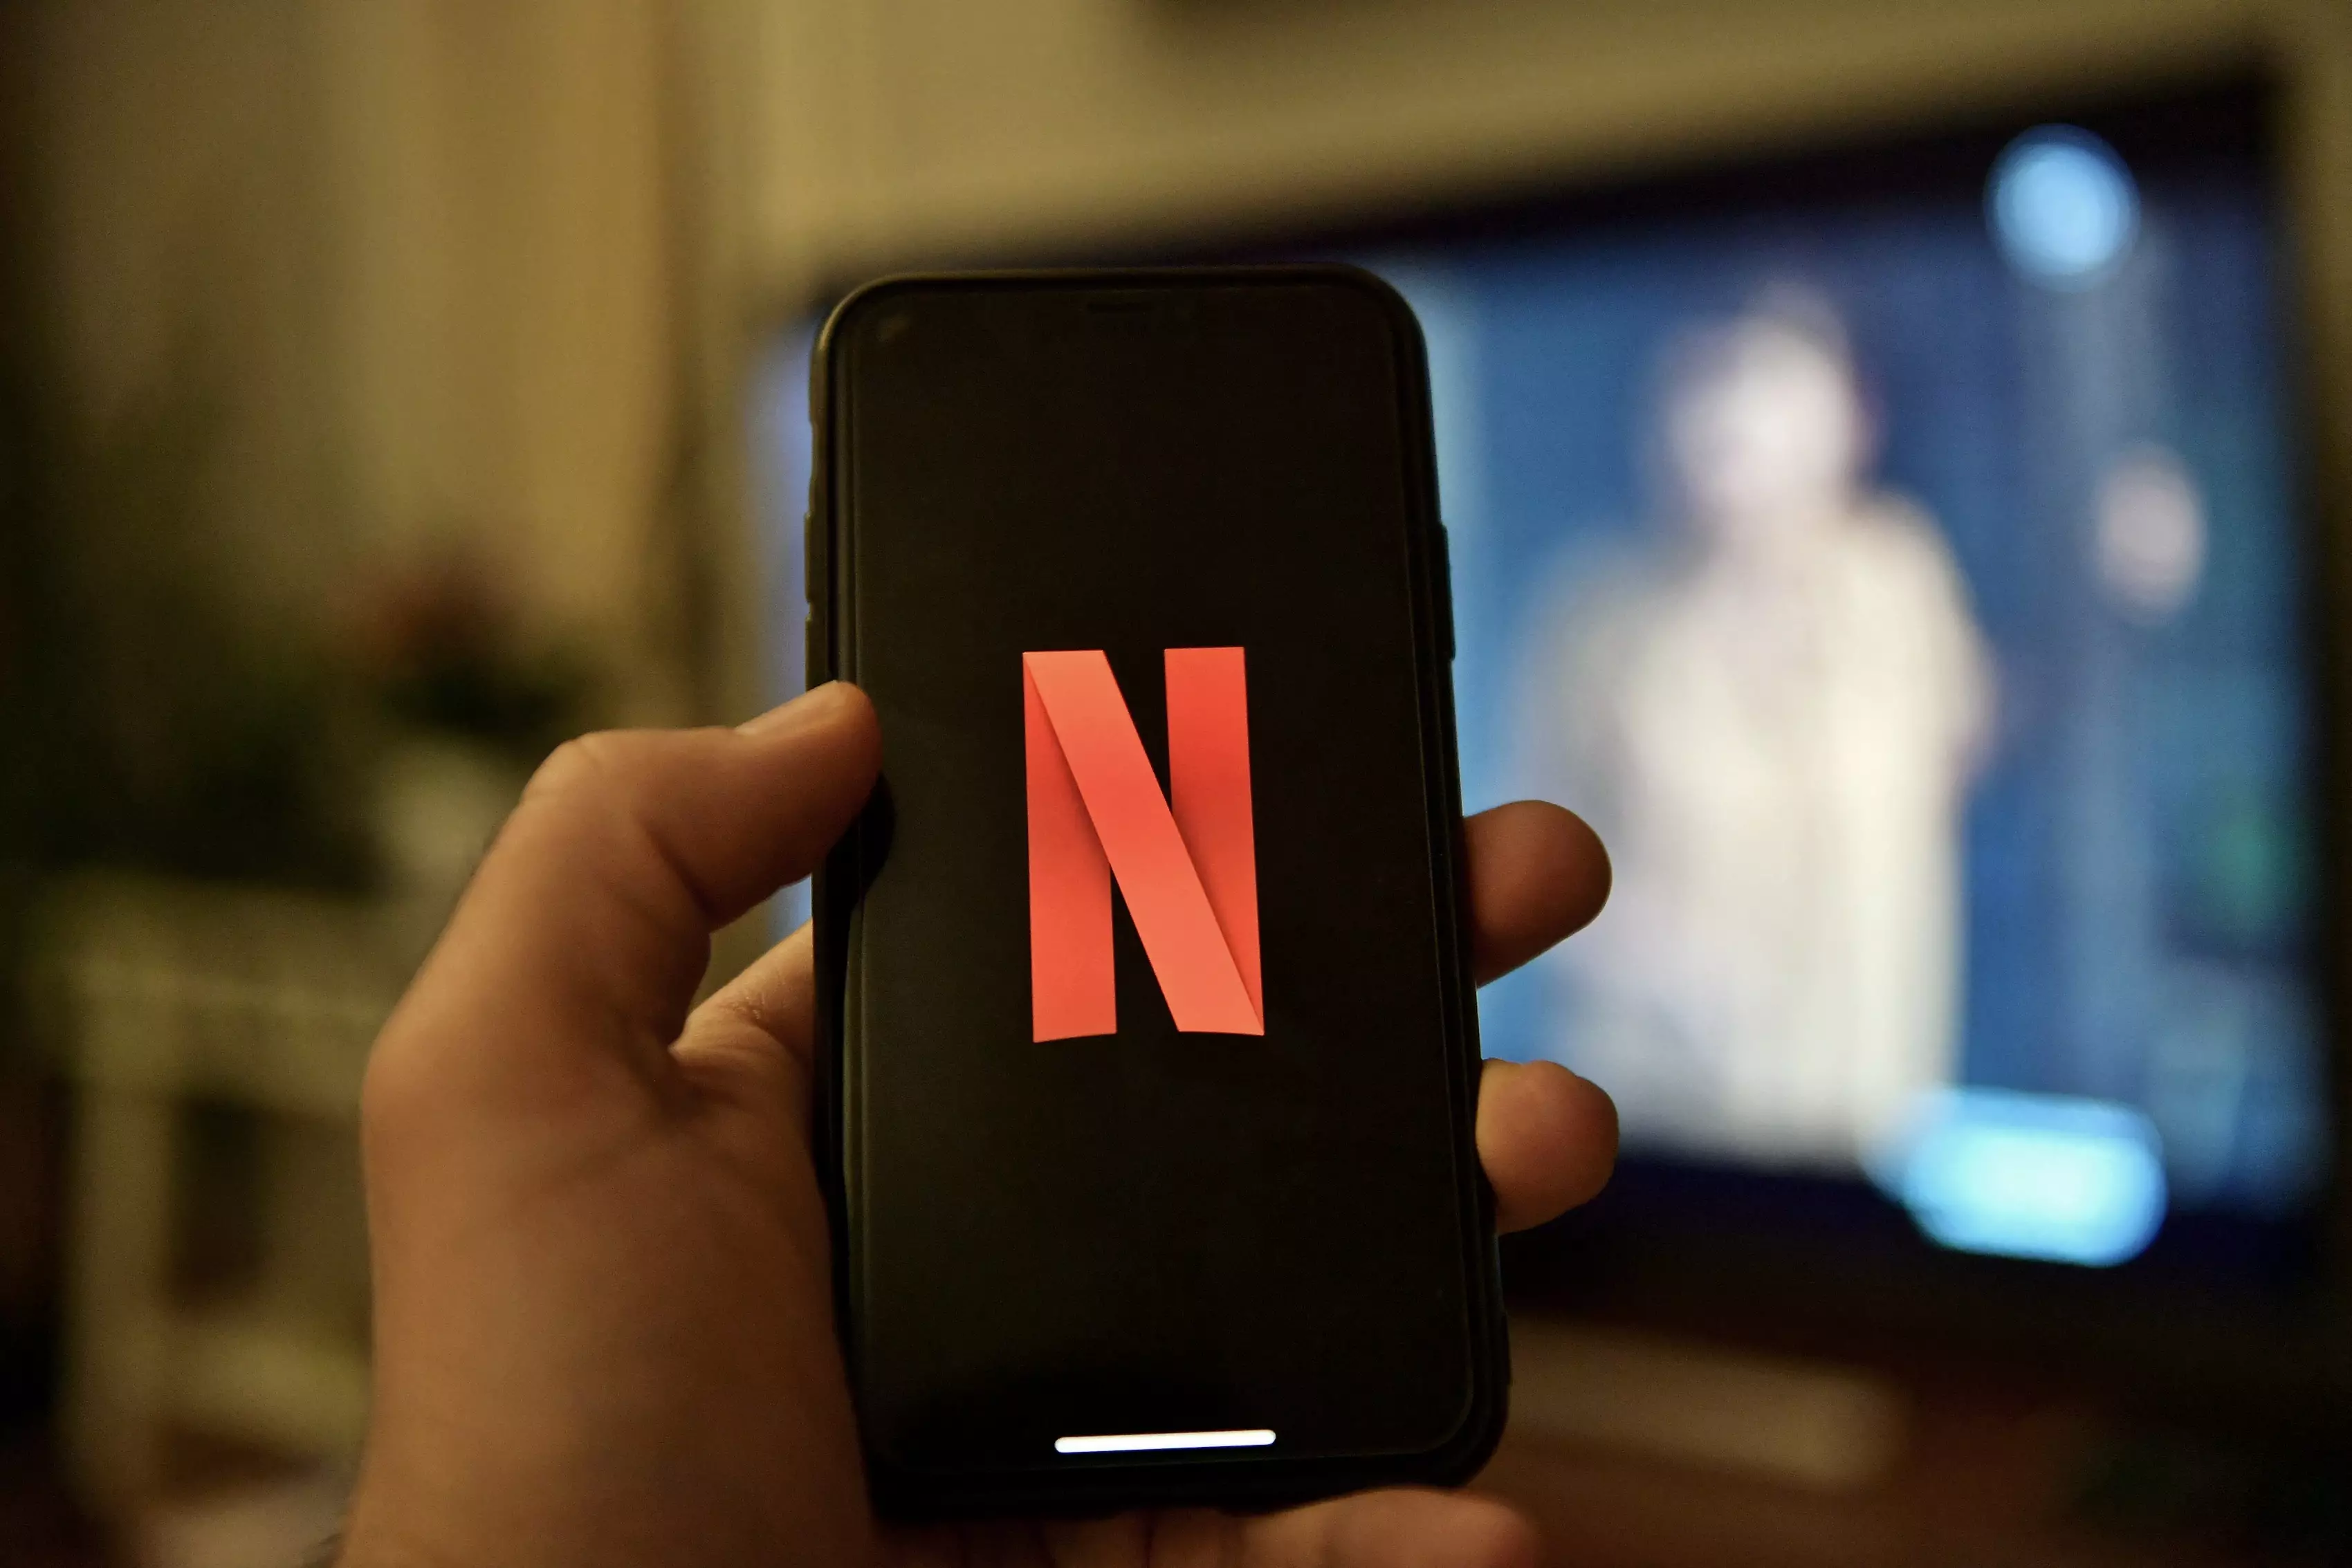 Netflix has restricted streaming quality in Europe due to increased demand amid the Covid-19 outbreak.